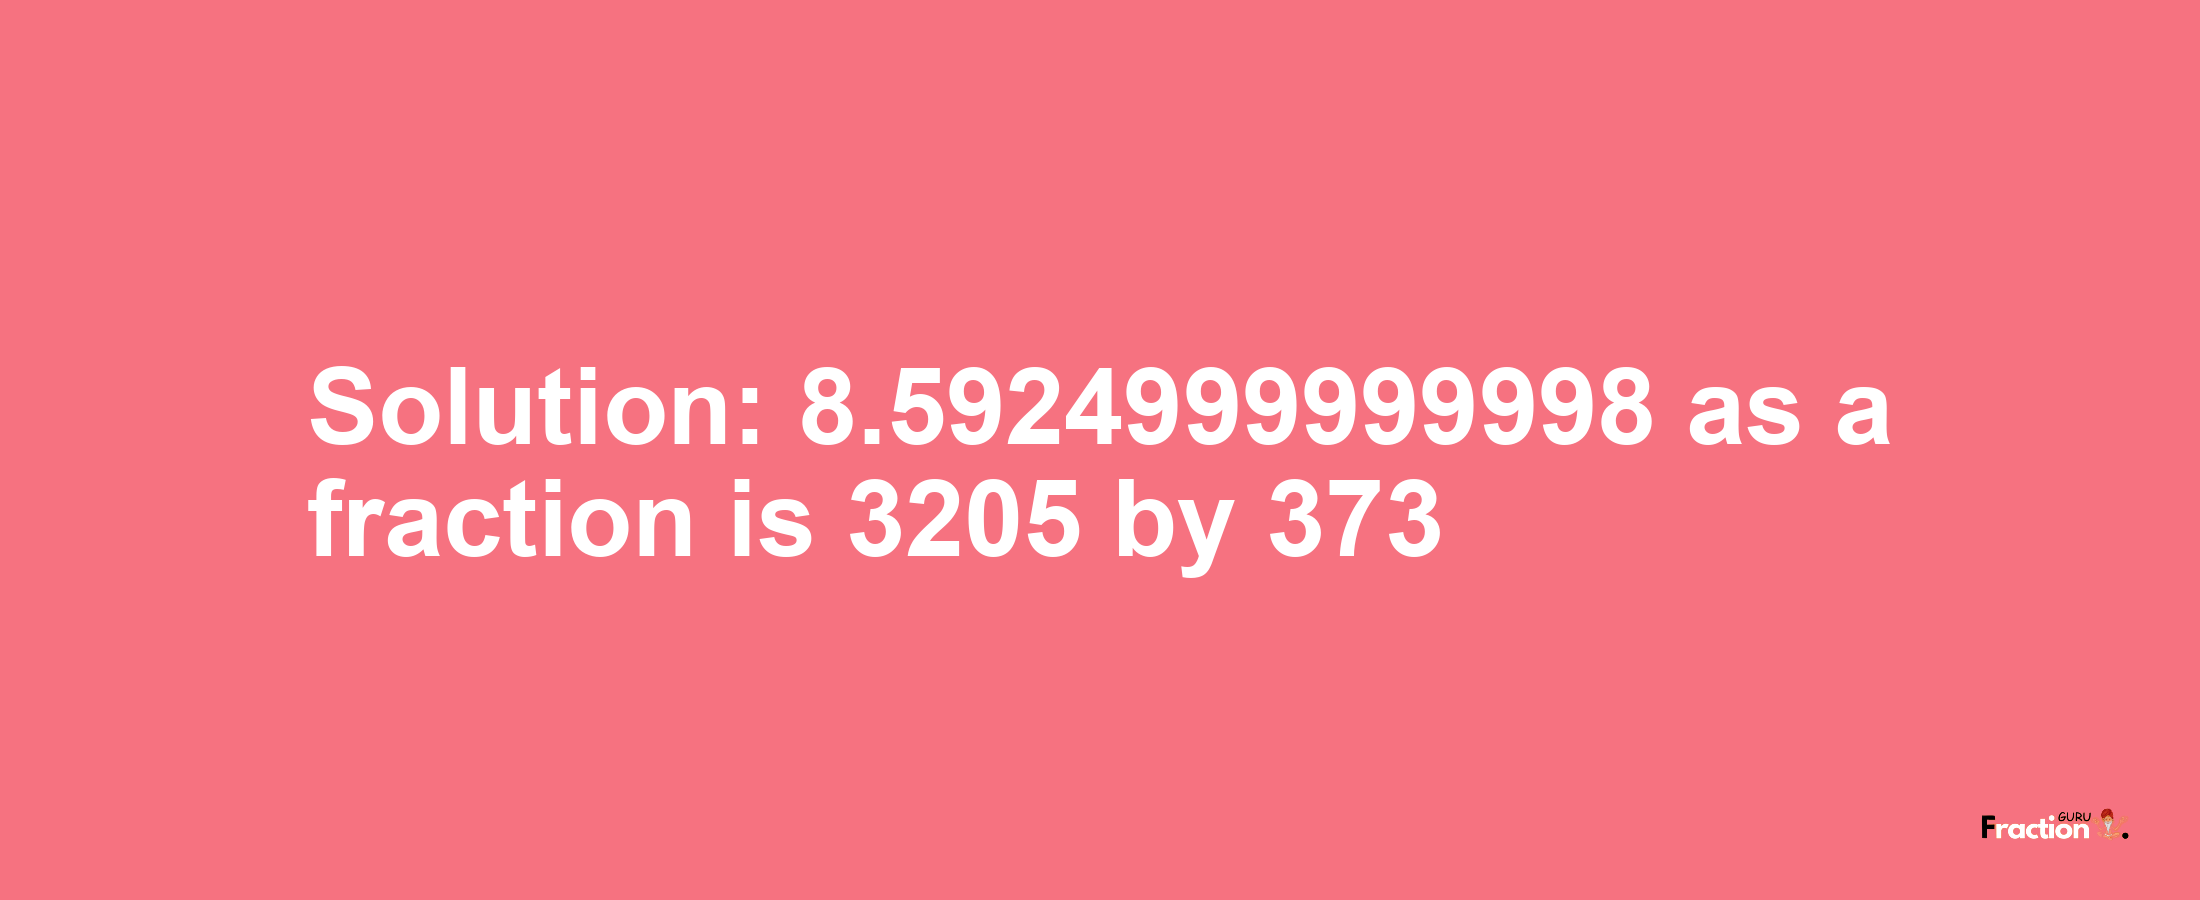 Solution:8.5924999999998 as a fraction is 3205/373